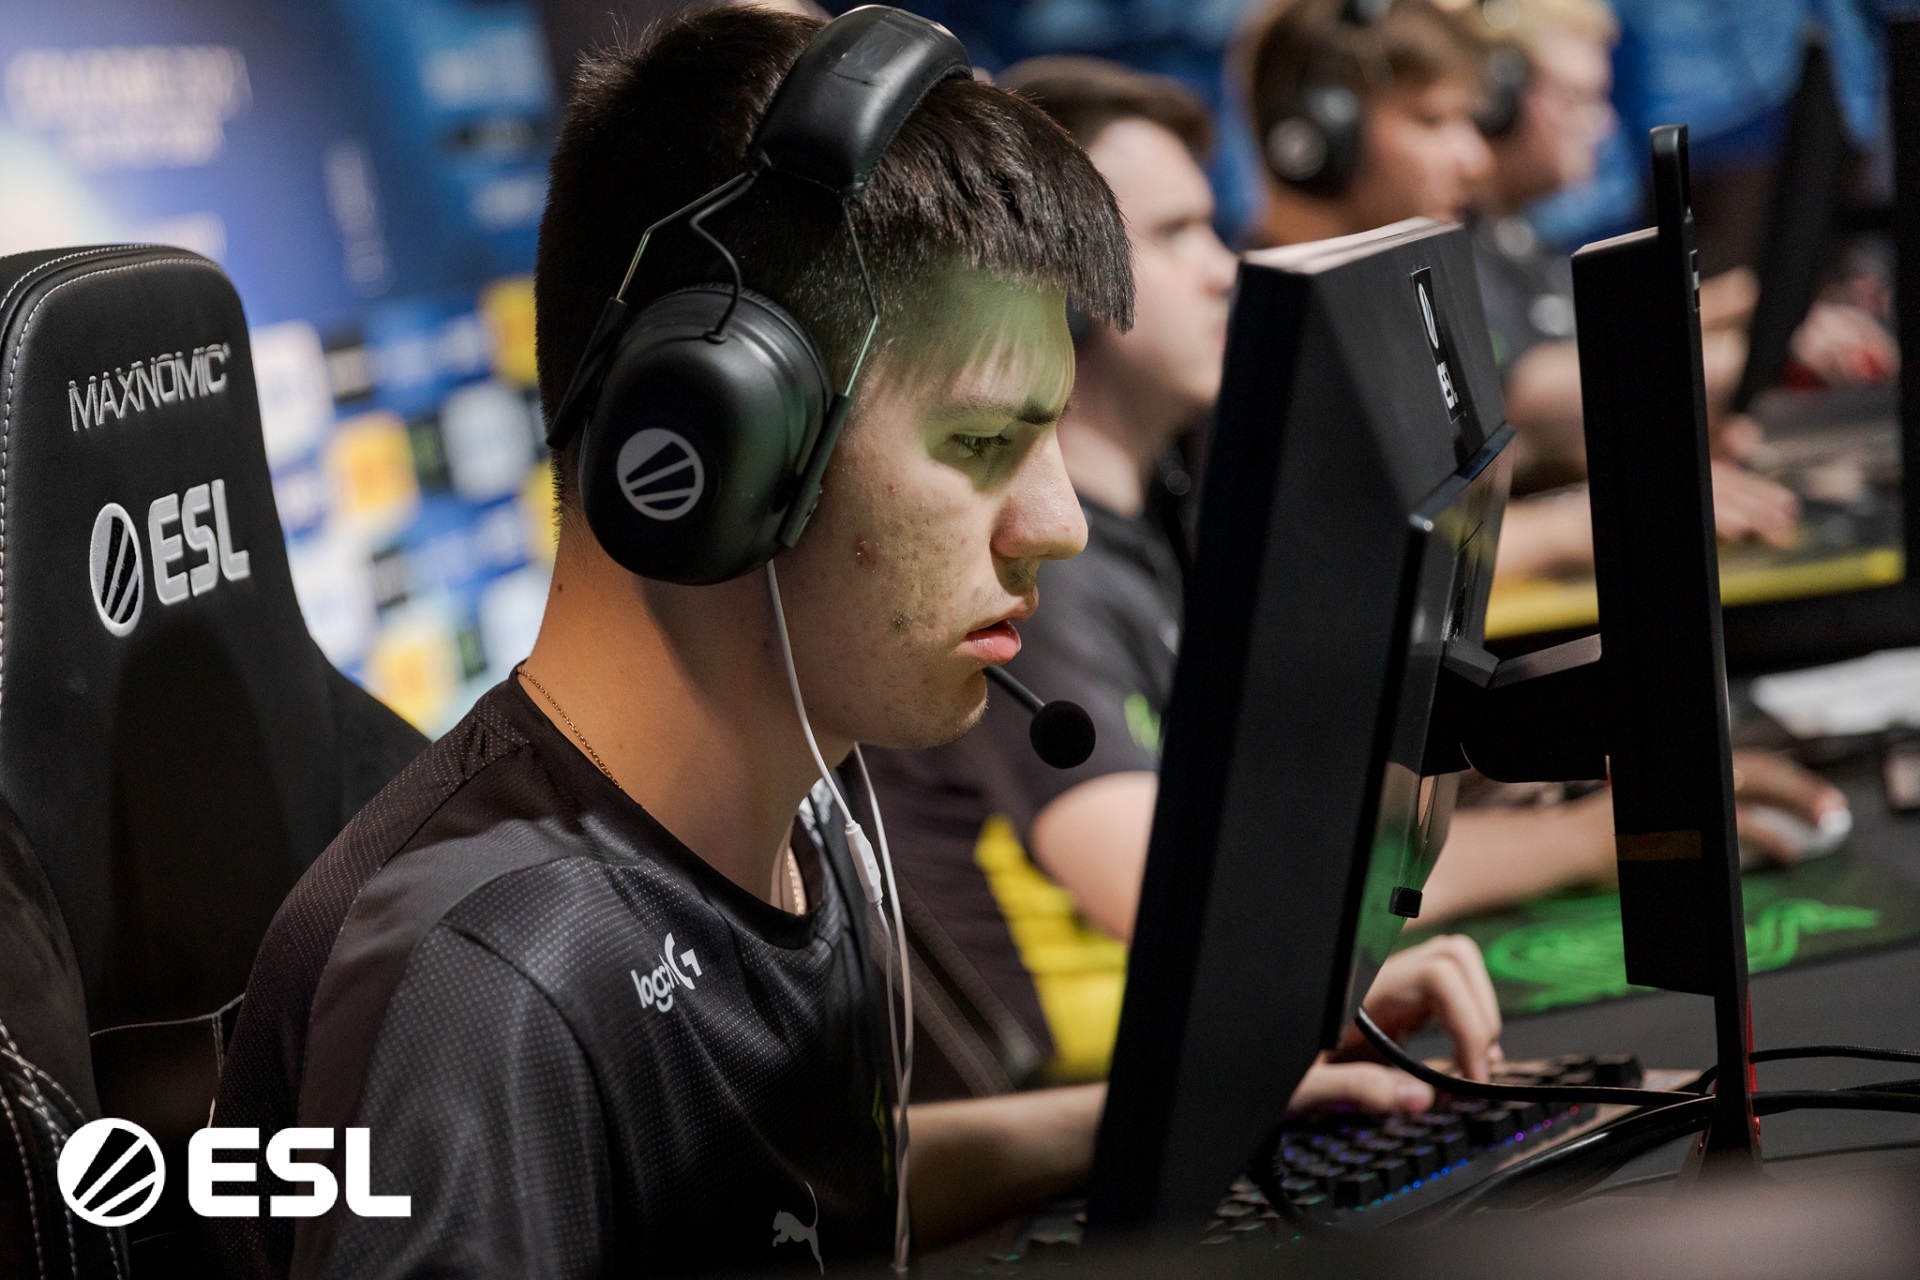 b1t is ninth in HLTV.org's 2021 rankings